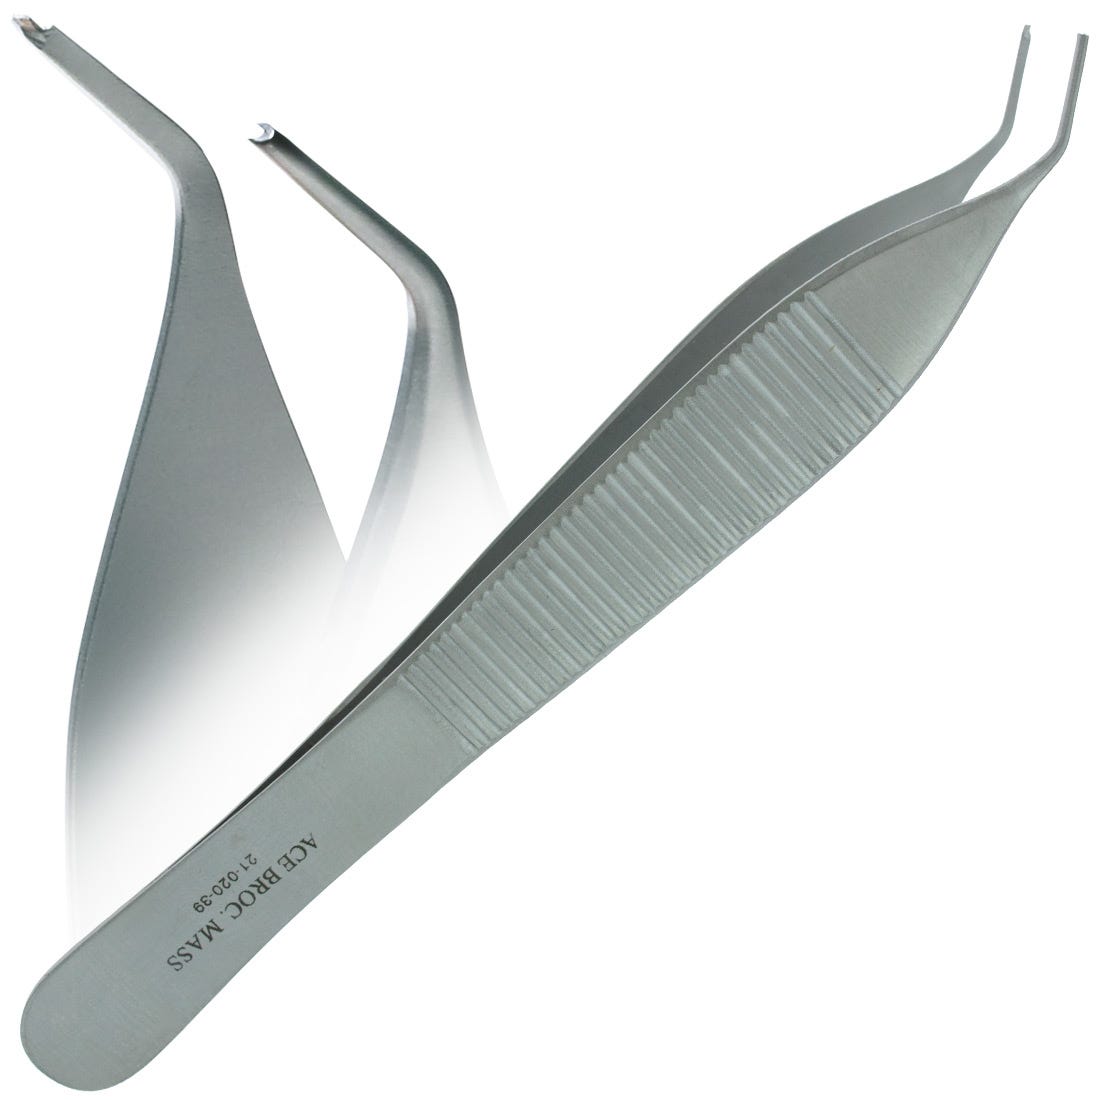 ACE Micro Adson Tissue Forceps, angled, .8mm tips, 1x2 teeth